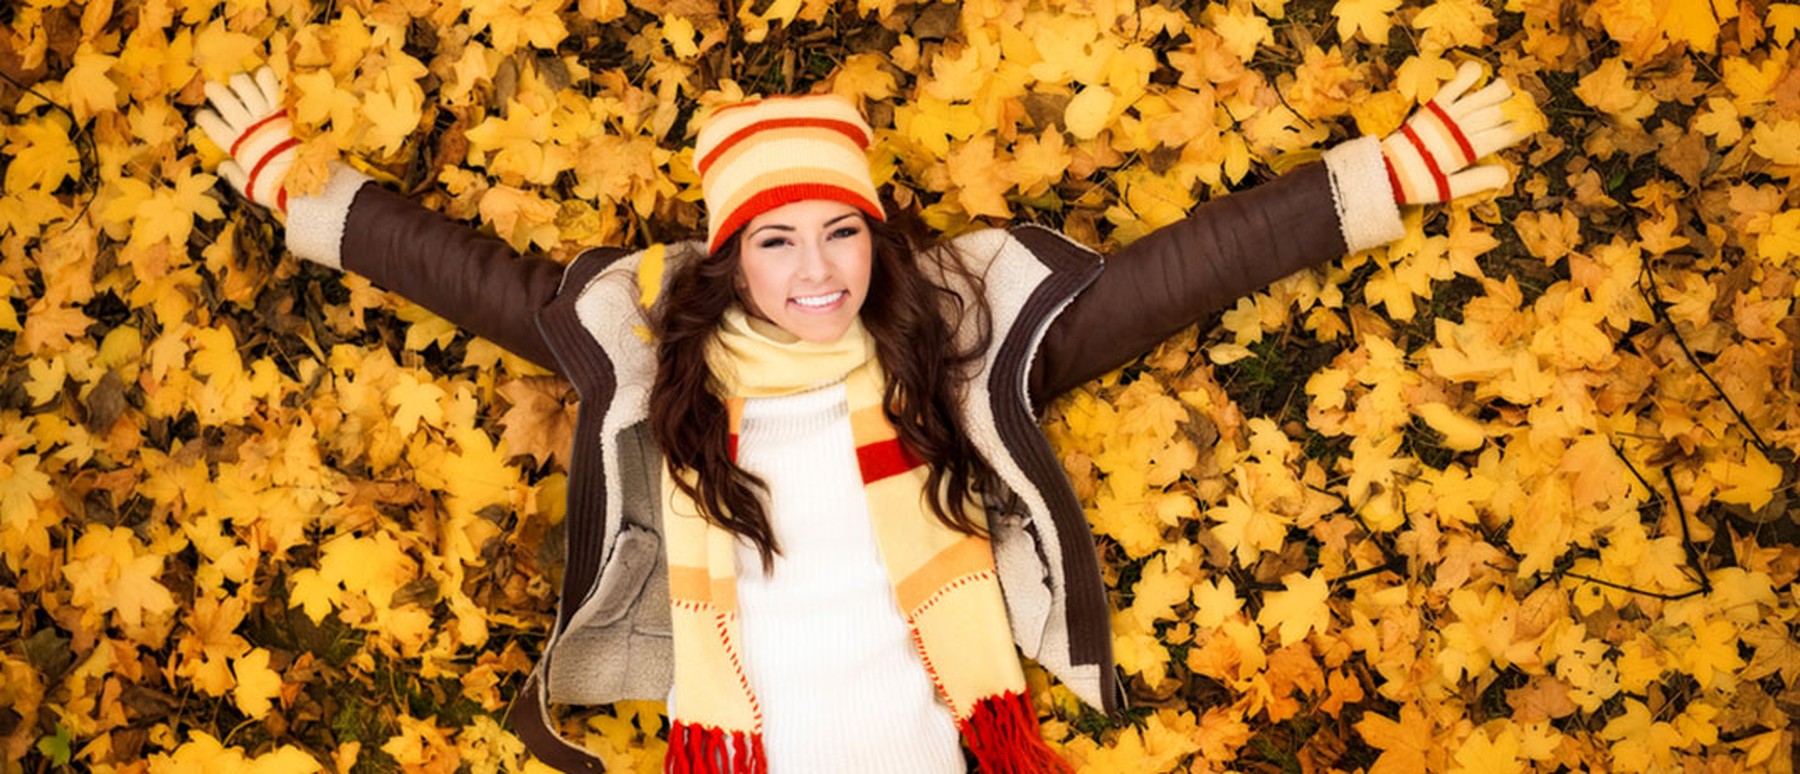 Fall-elujah! The Best Deals on Fall Fashion